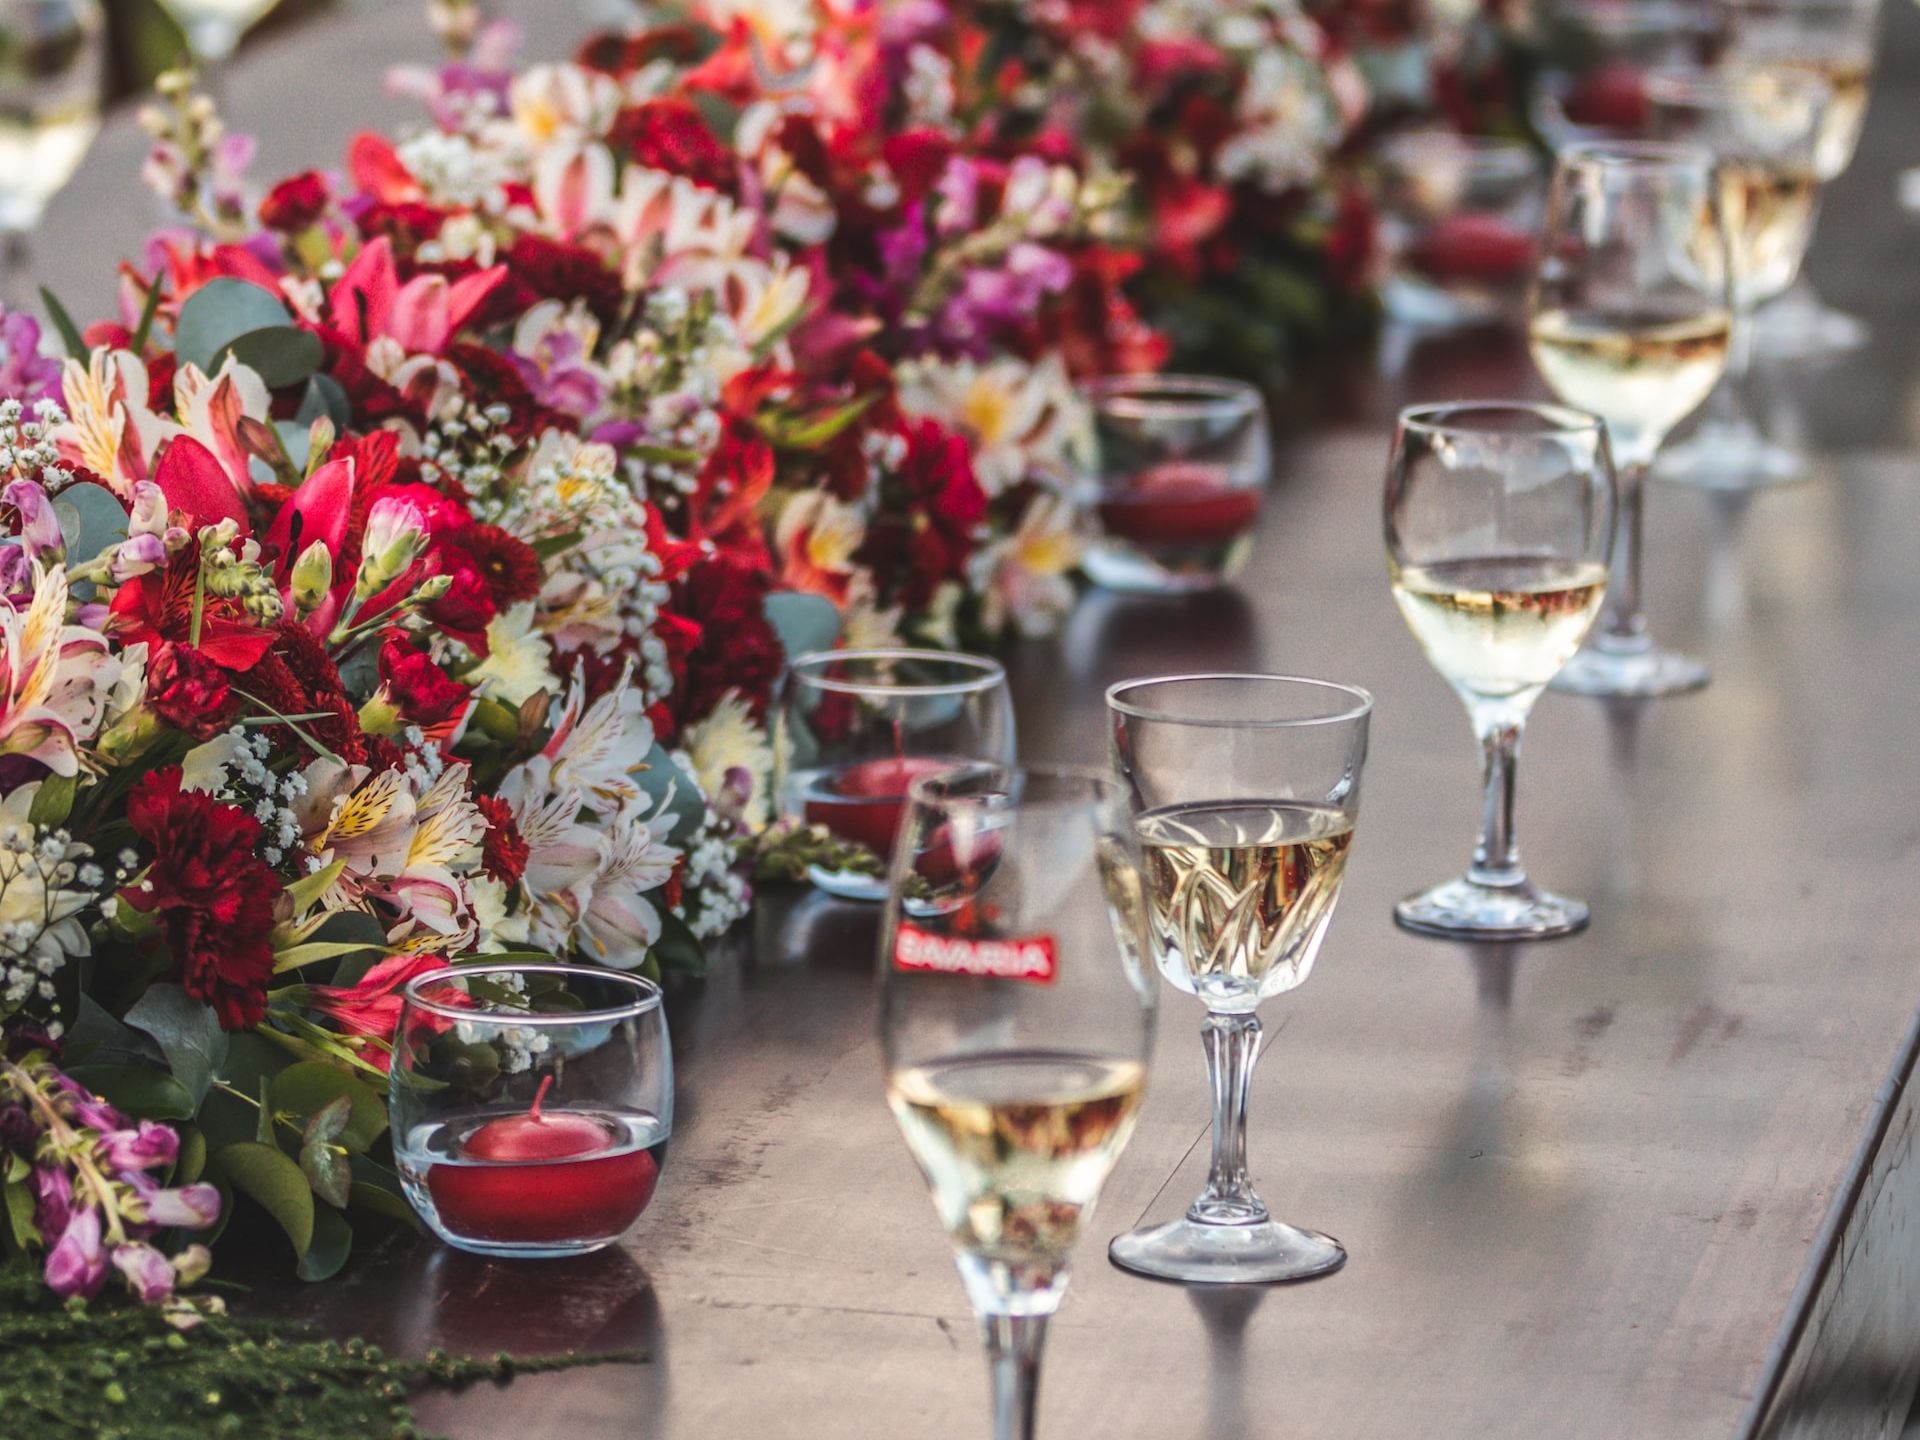 A decorated wedding table.